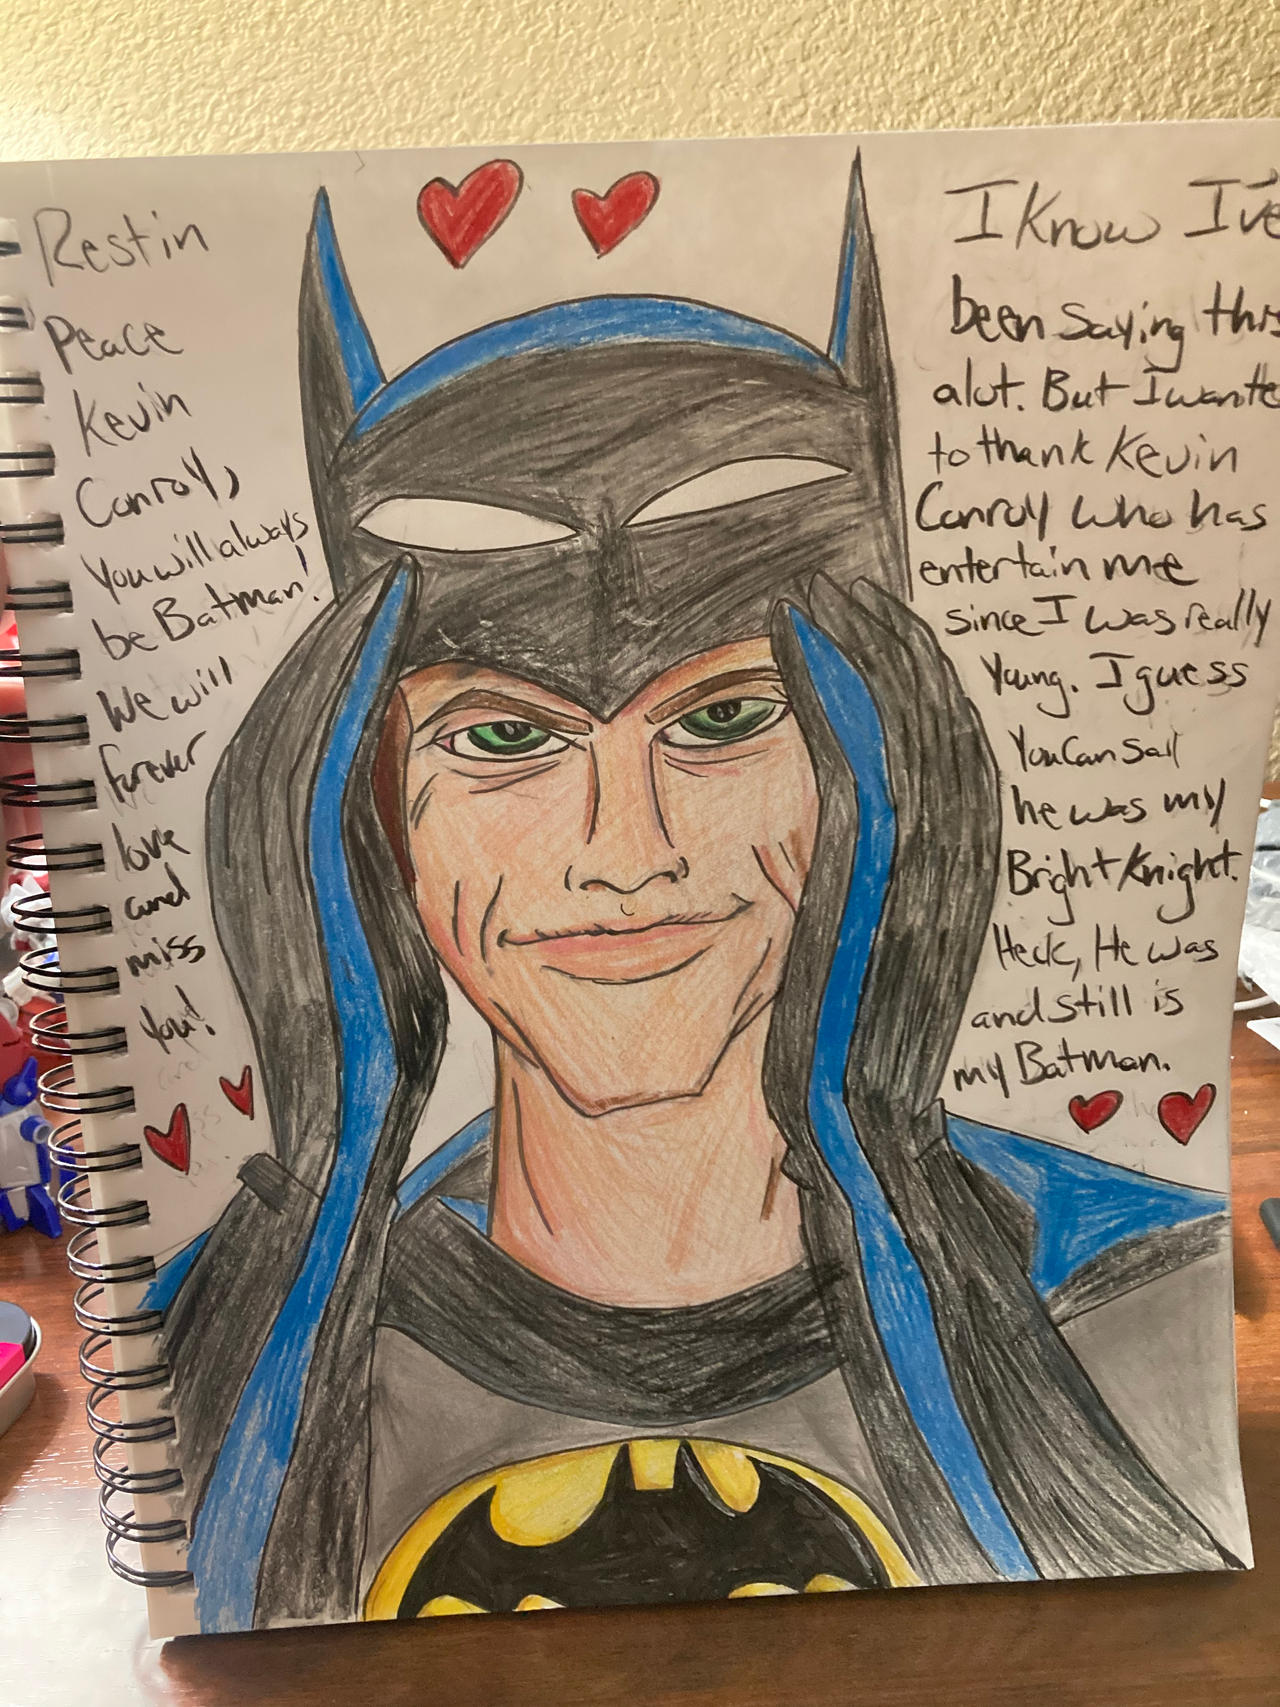 Kevin Conroy Tribute Artwork by Robotfangirl67 on DeviantArt